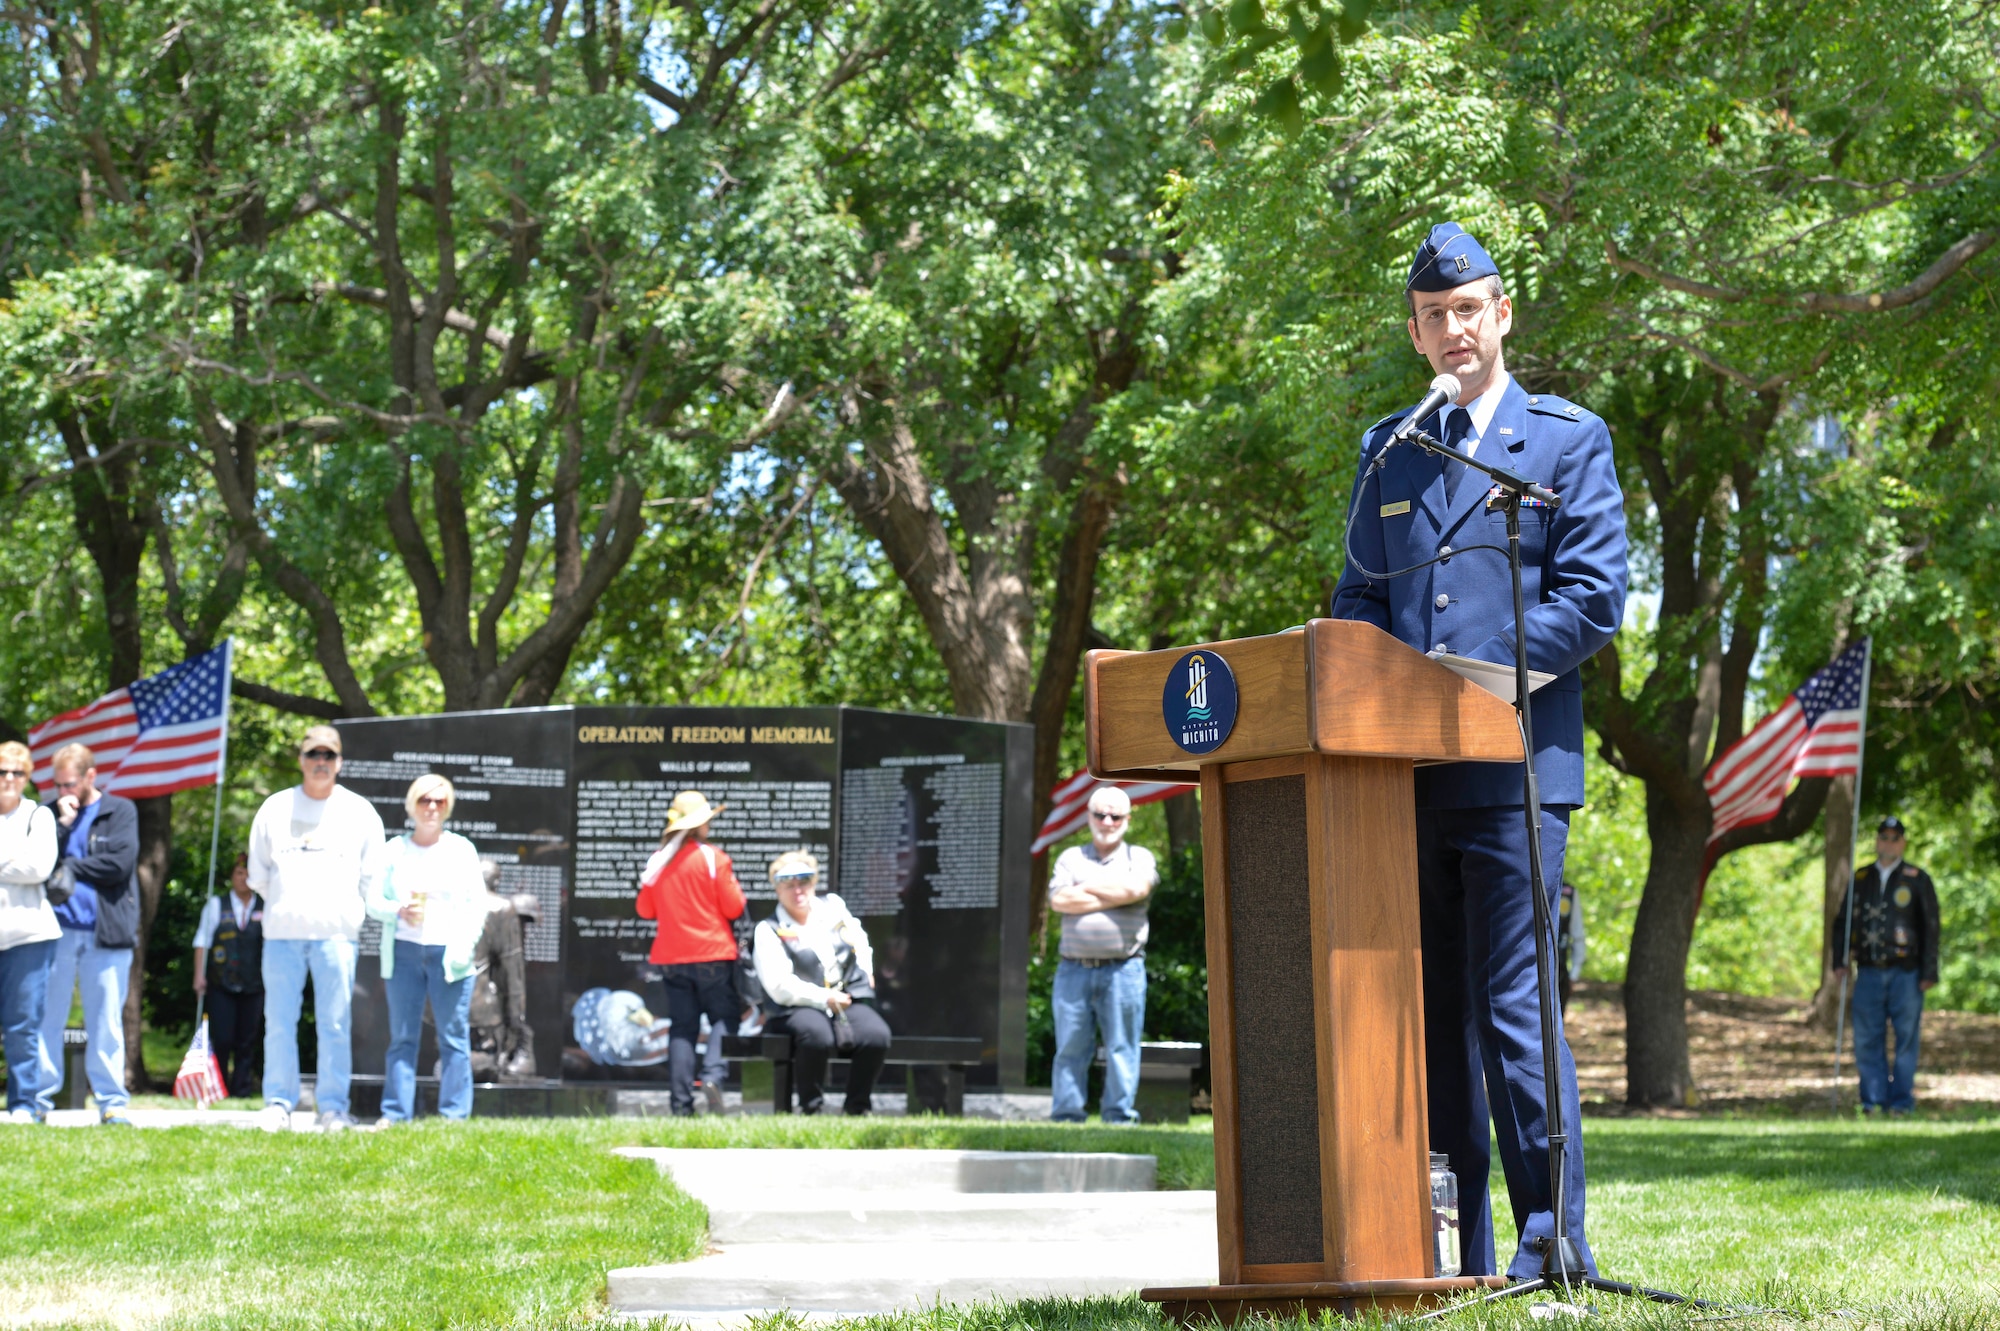 Capt. Nick Williams, 9th Airlift Squadron C-5 Galaxy pilot, Dover Air Force Base, Delaware, addresses audience members attending the new Operation Freedom Memorial, during a dedication ceremony, May, 17, 2014, in Wichita, Kansas. Formerly stationed at McConnell Air Force Base, Kansas, Williams was among the board of committee members for OFM’s foundation and helped raise money for the project through donations. (U.S. Air Force photo/Staff Sgt. Jess Lockoski)